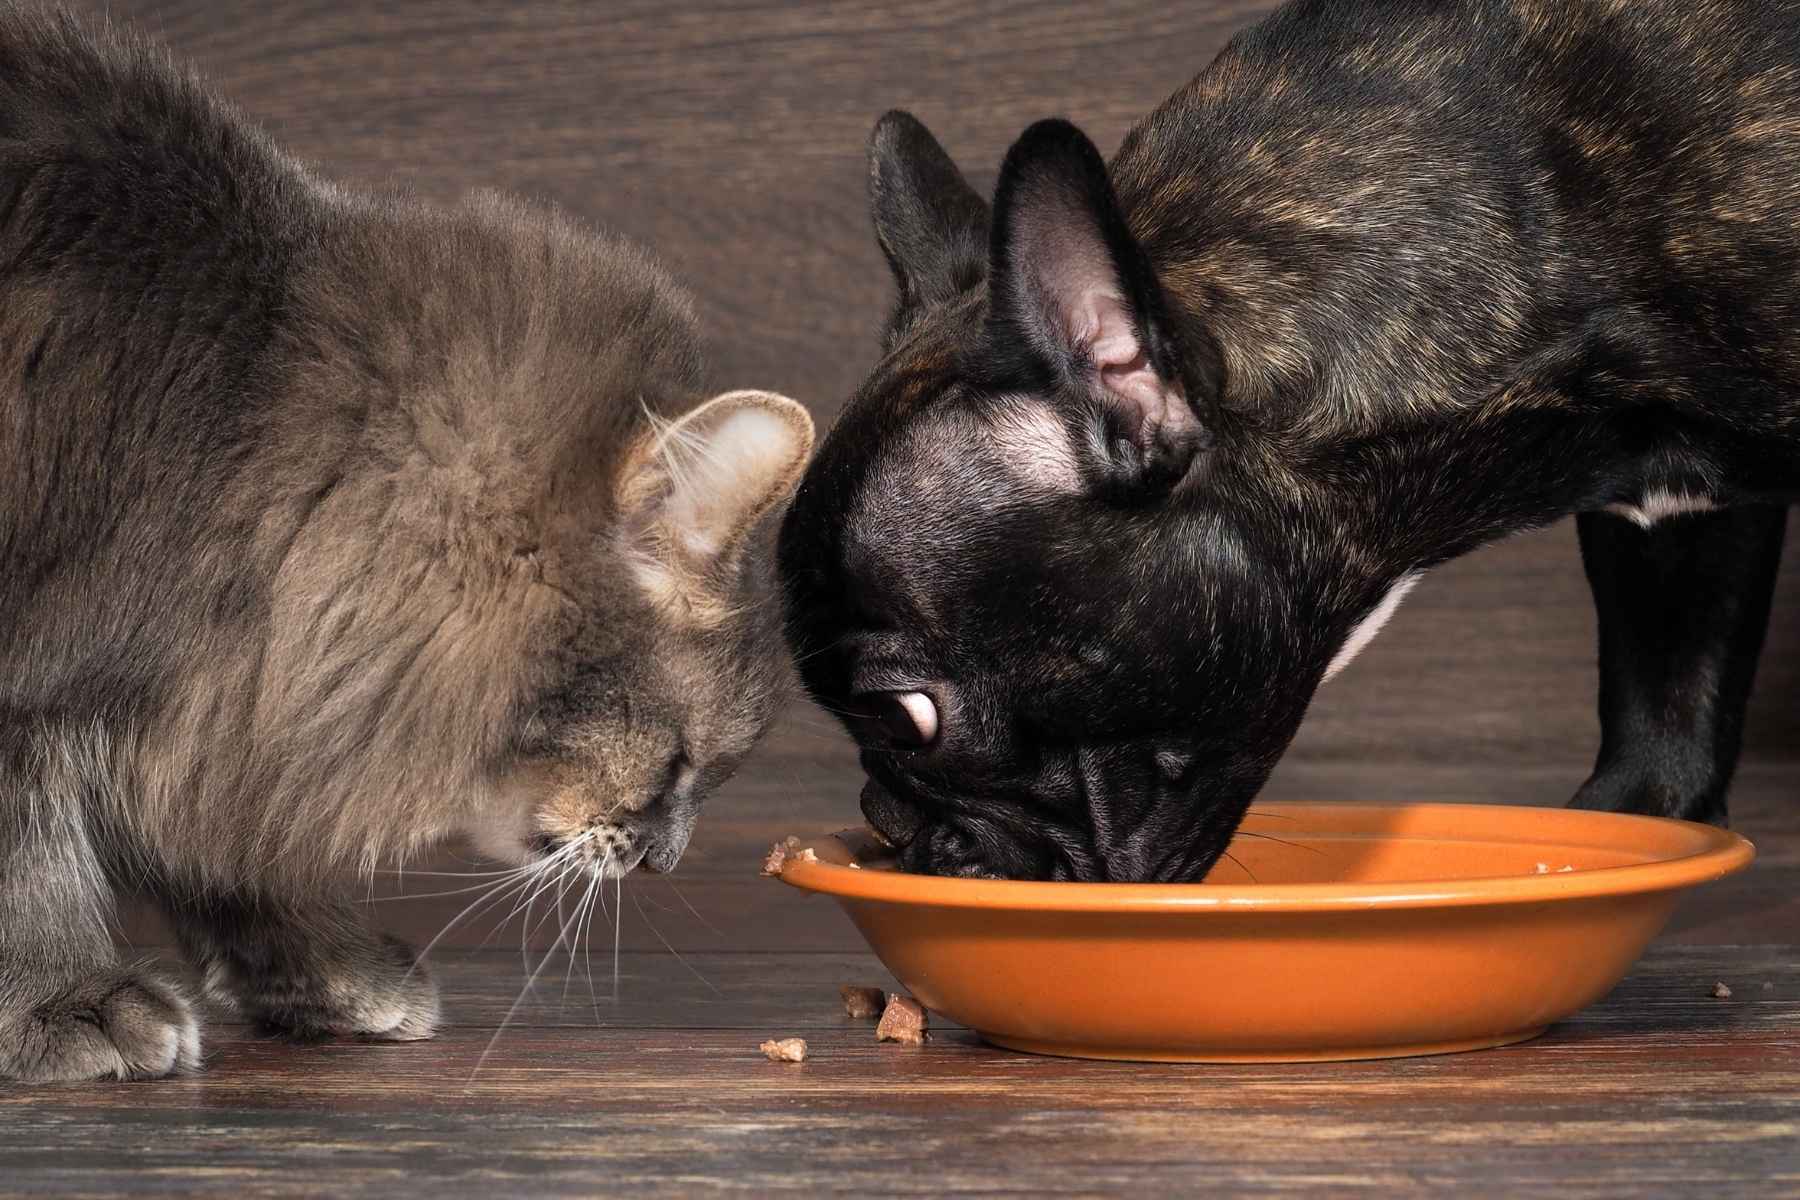 Dog eating cat food from a bowl and the cat is not happy